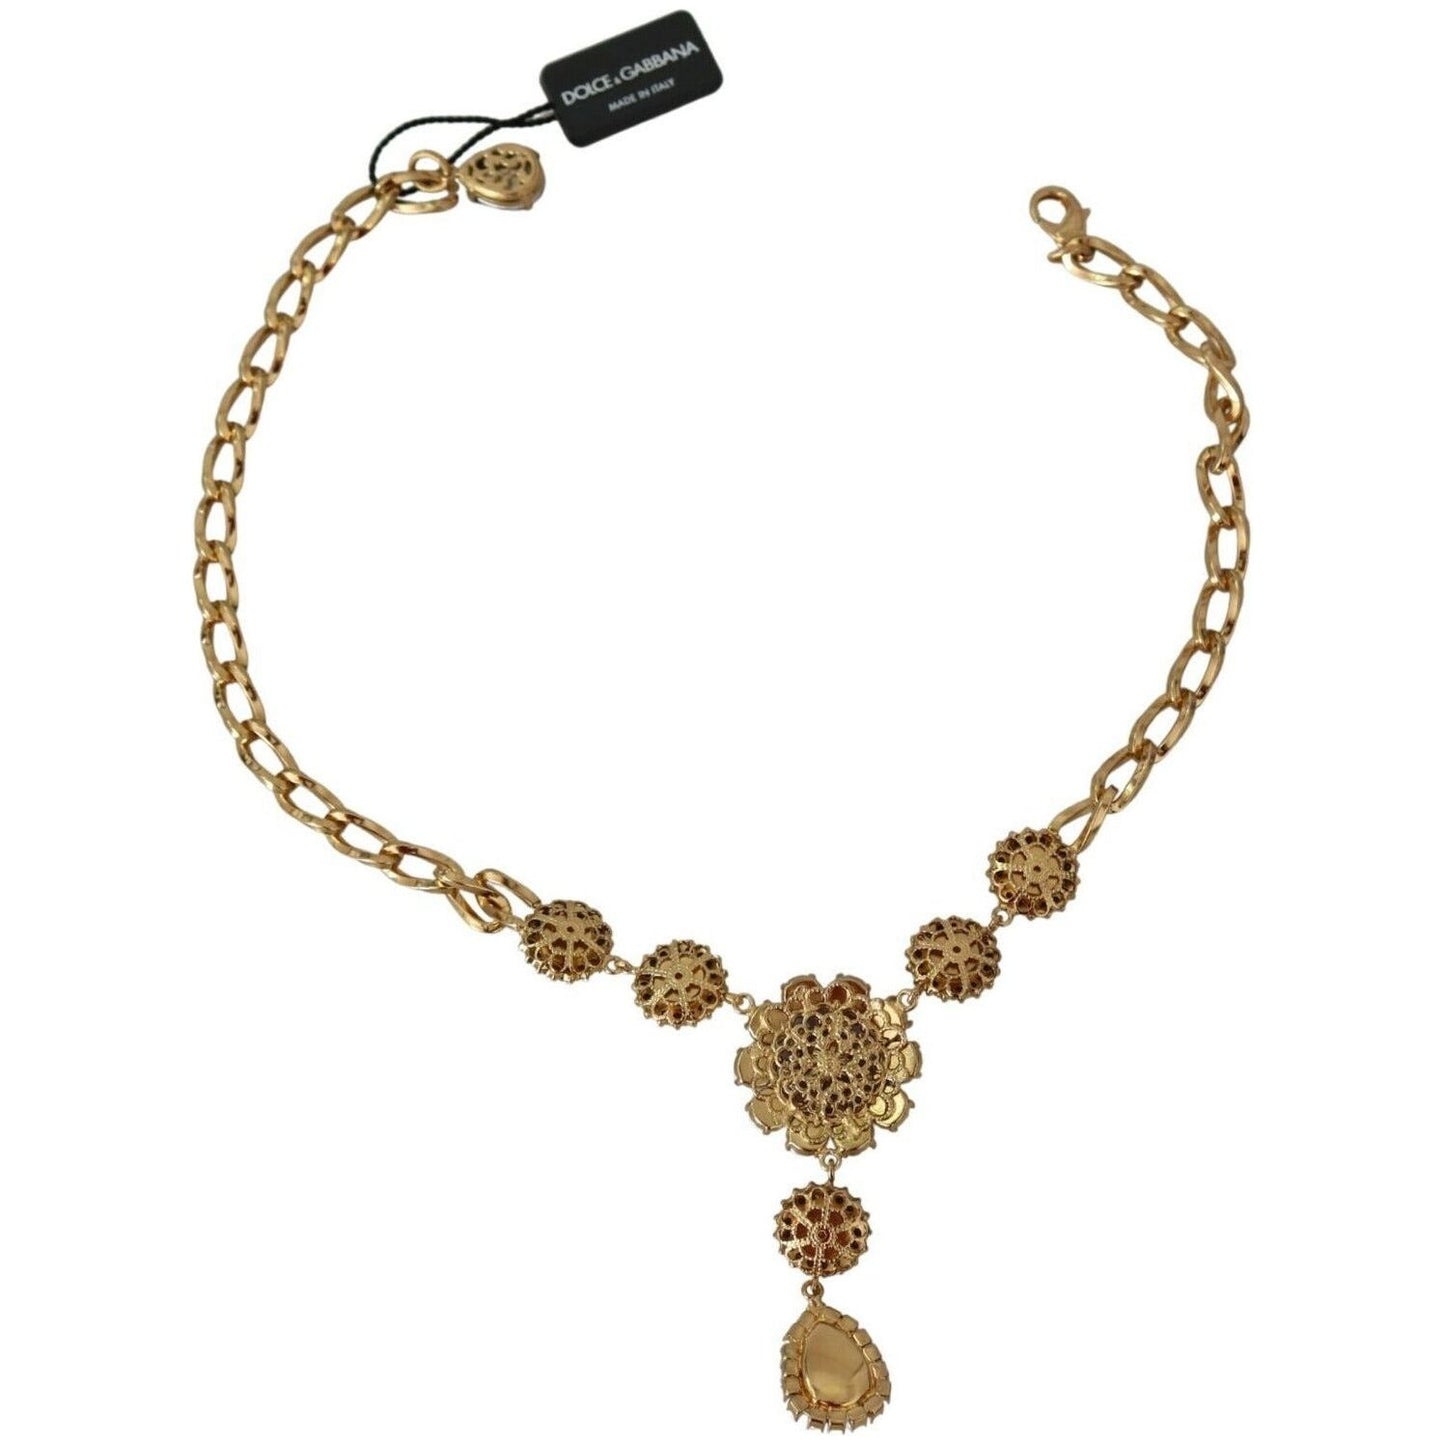 Dolce & Gabbana Elegant Gold Crystal Floral Charm Necklace pink-gold-brass-crystal-purple-pearl-pendants WOMAN NECKLACE s-l1600-2022-10-06T154036.074-78770780-8d6.jpg